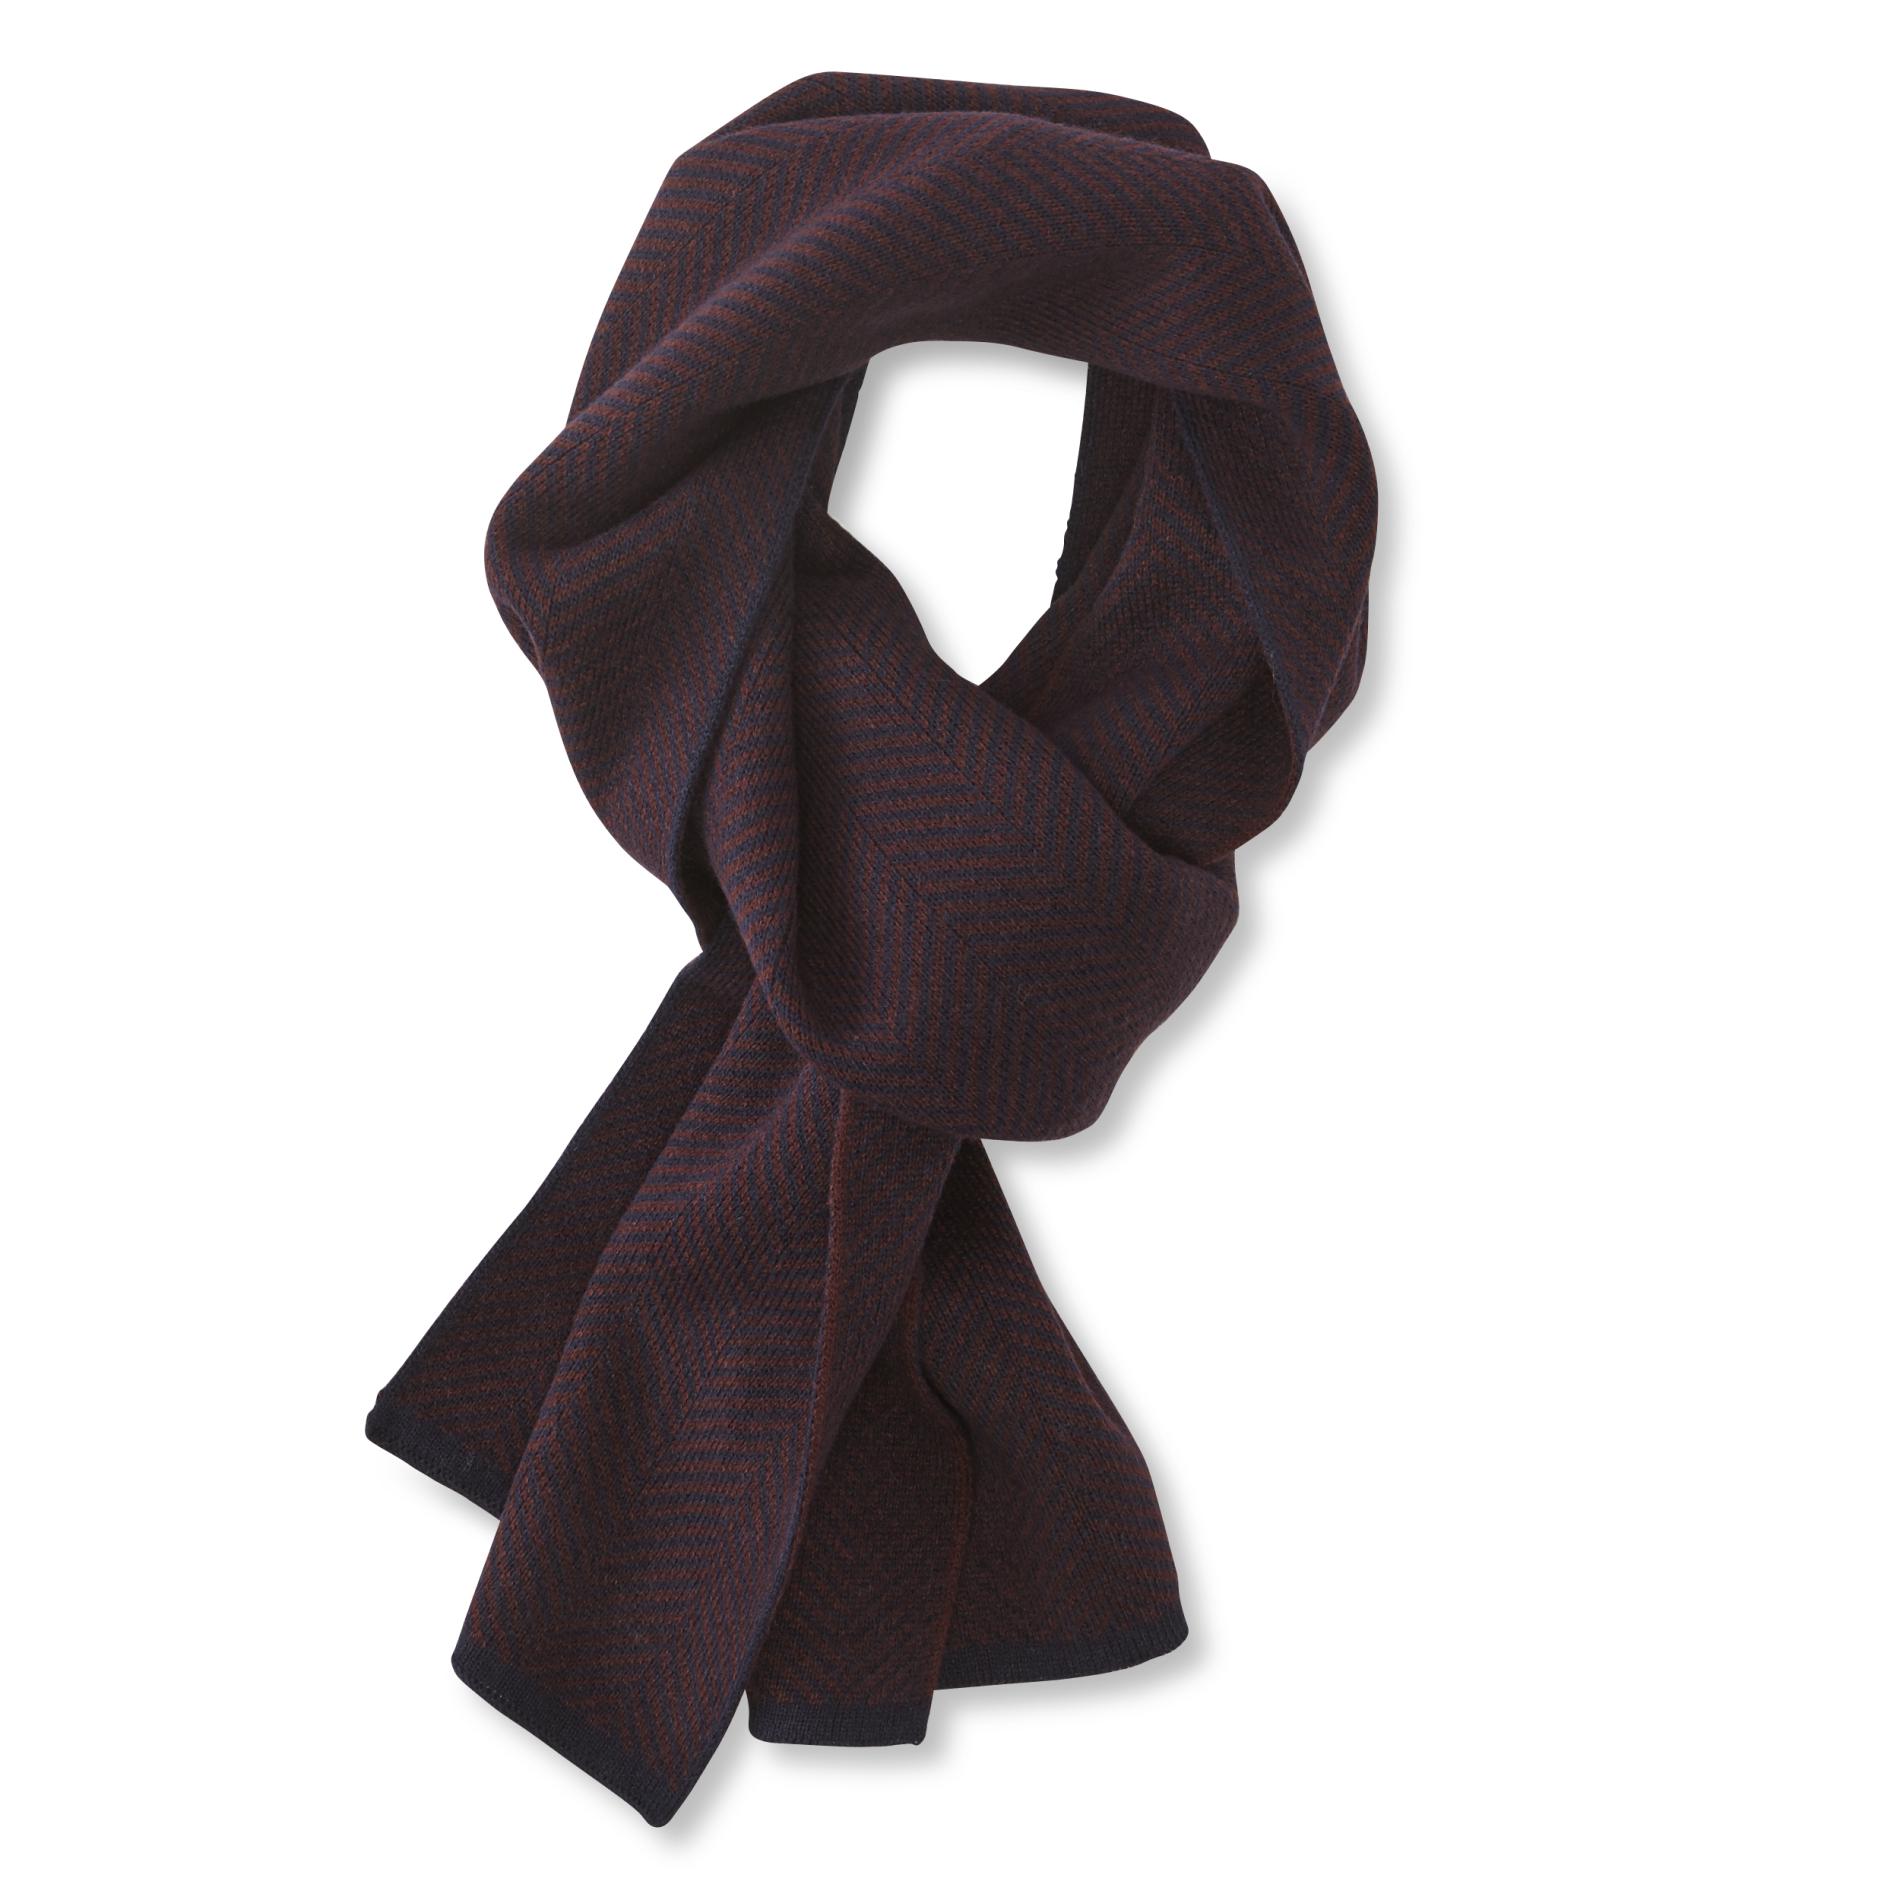 Simply Styled Men's Scarf - Jacquard